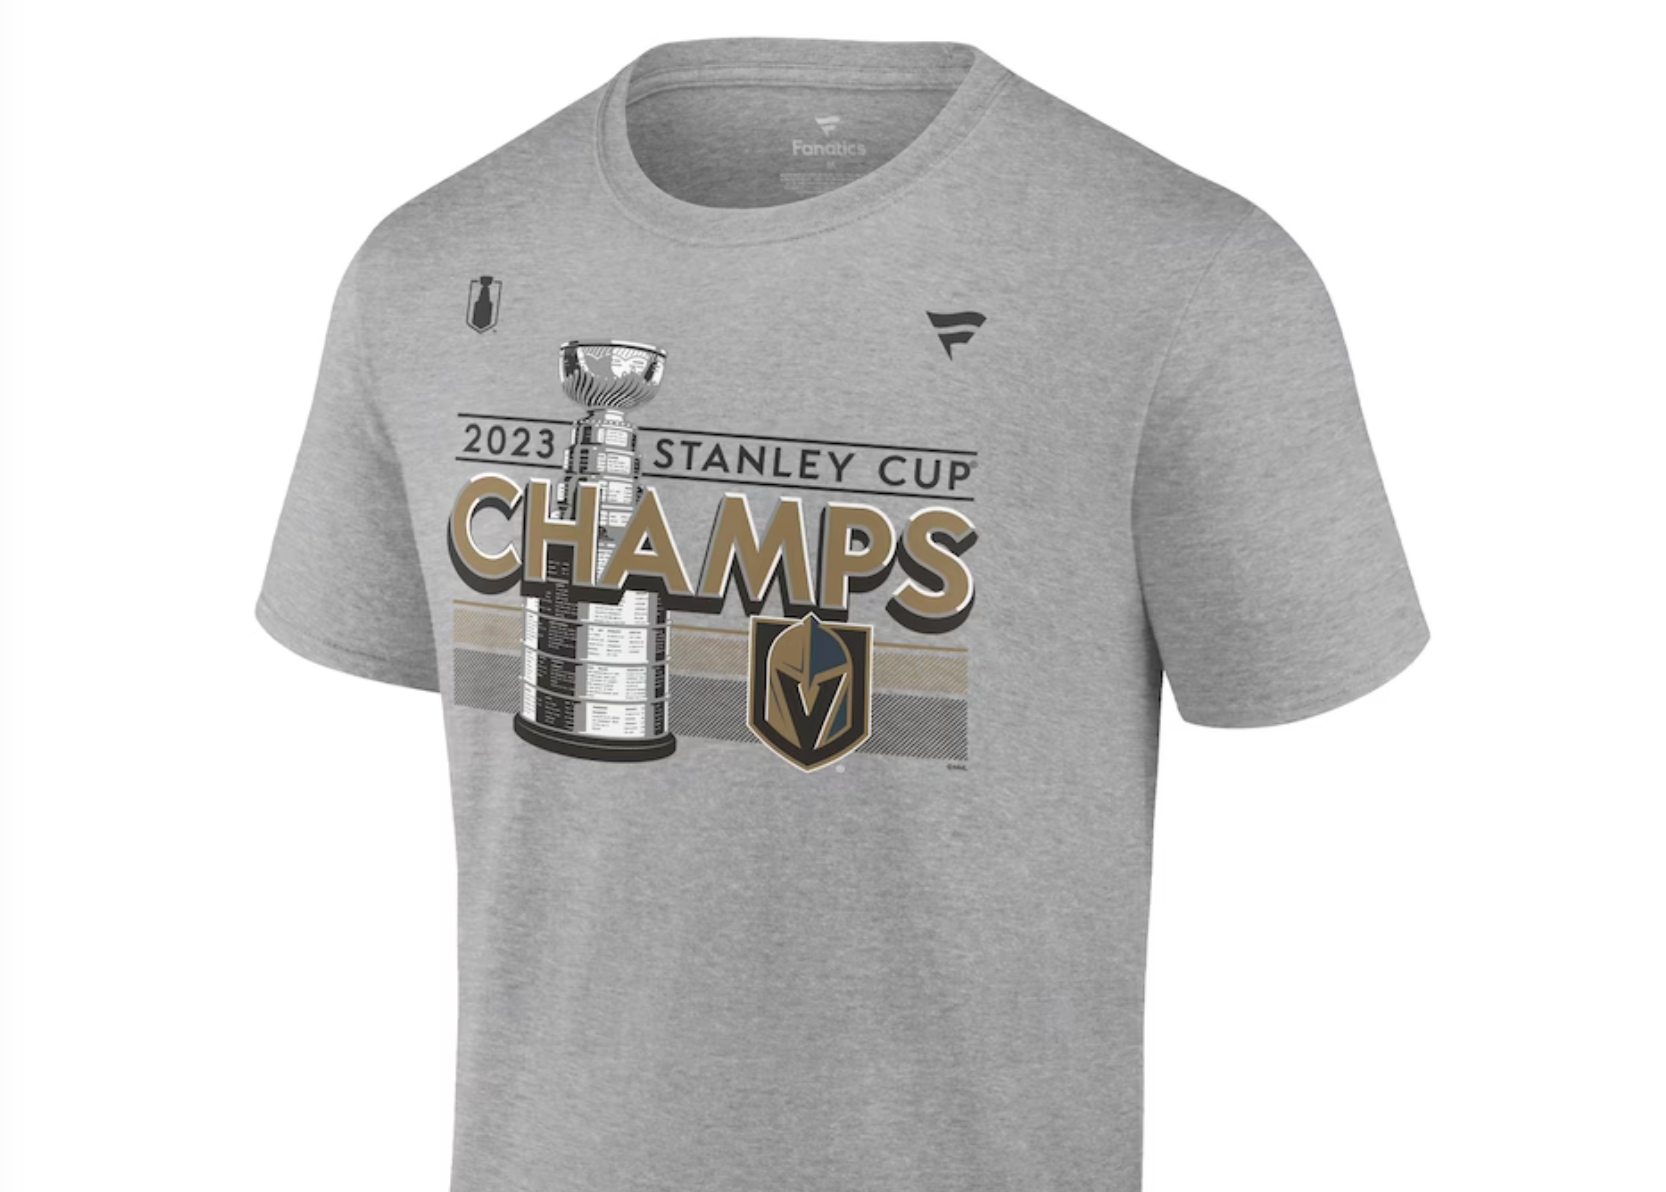 NHL Shop TV Spot, 'Quest for the Stanley Cup' 